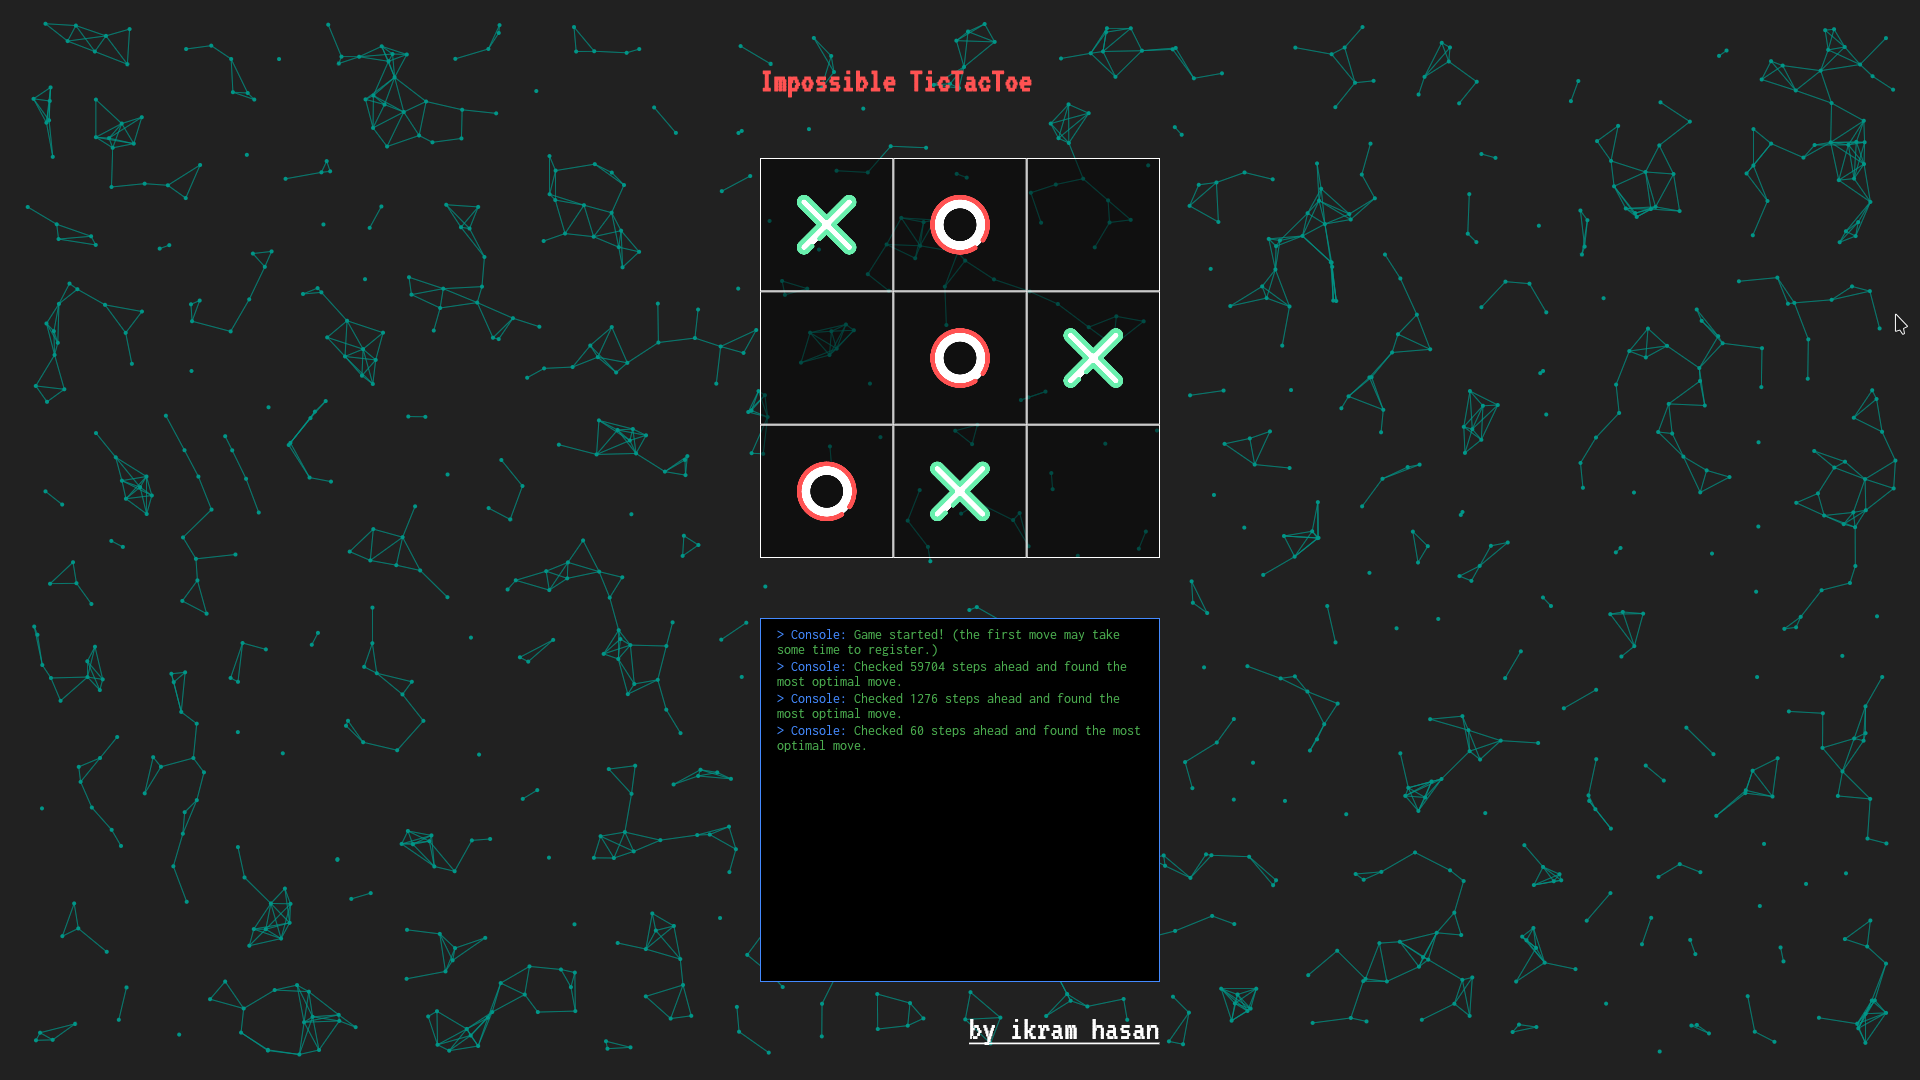 The Impossible Tic Tac Toe Game